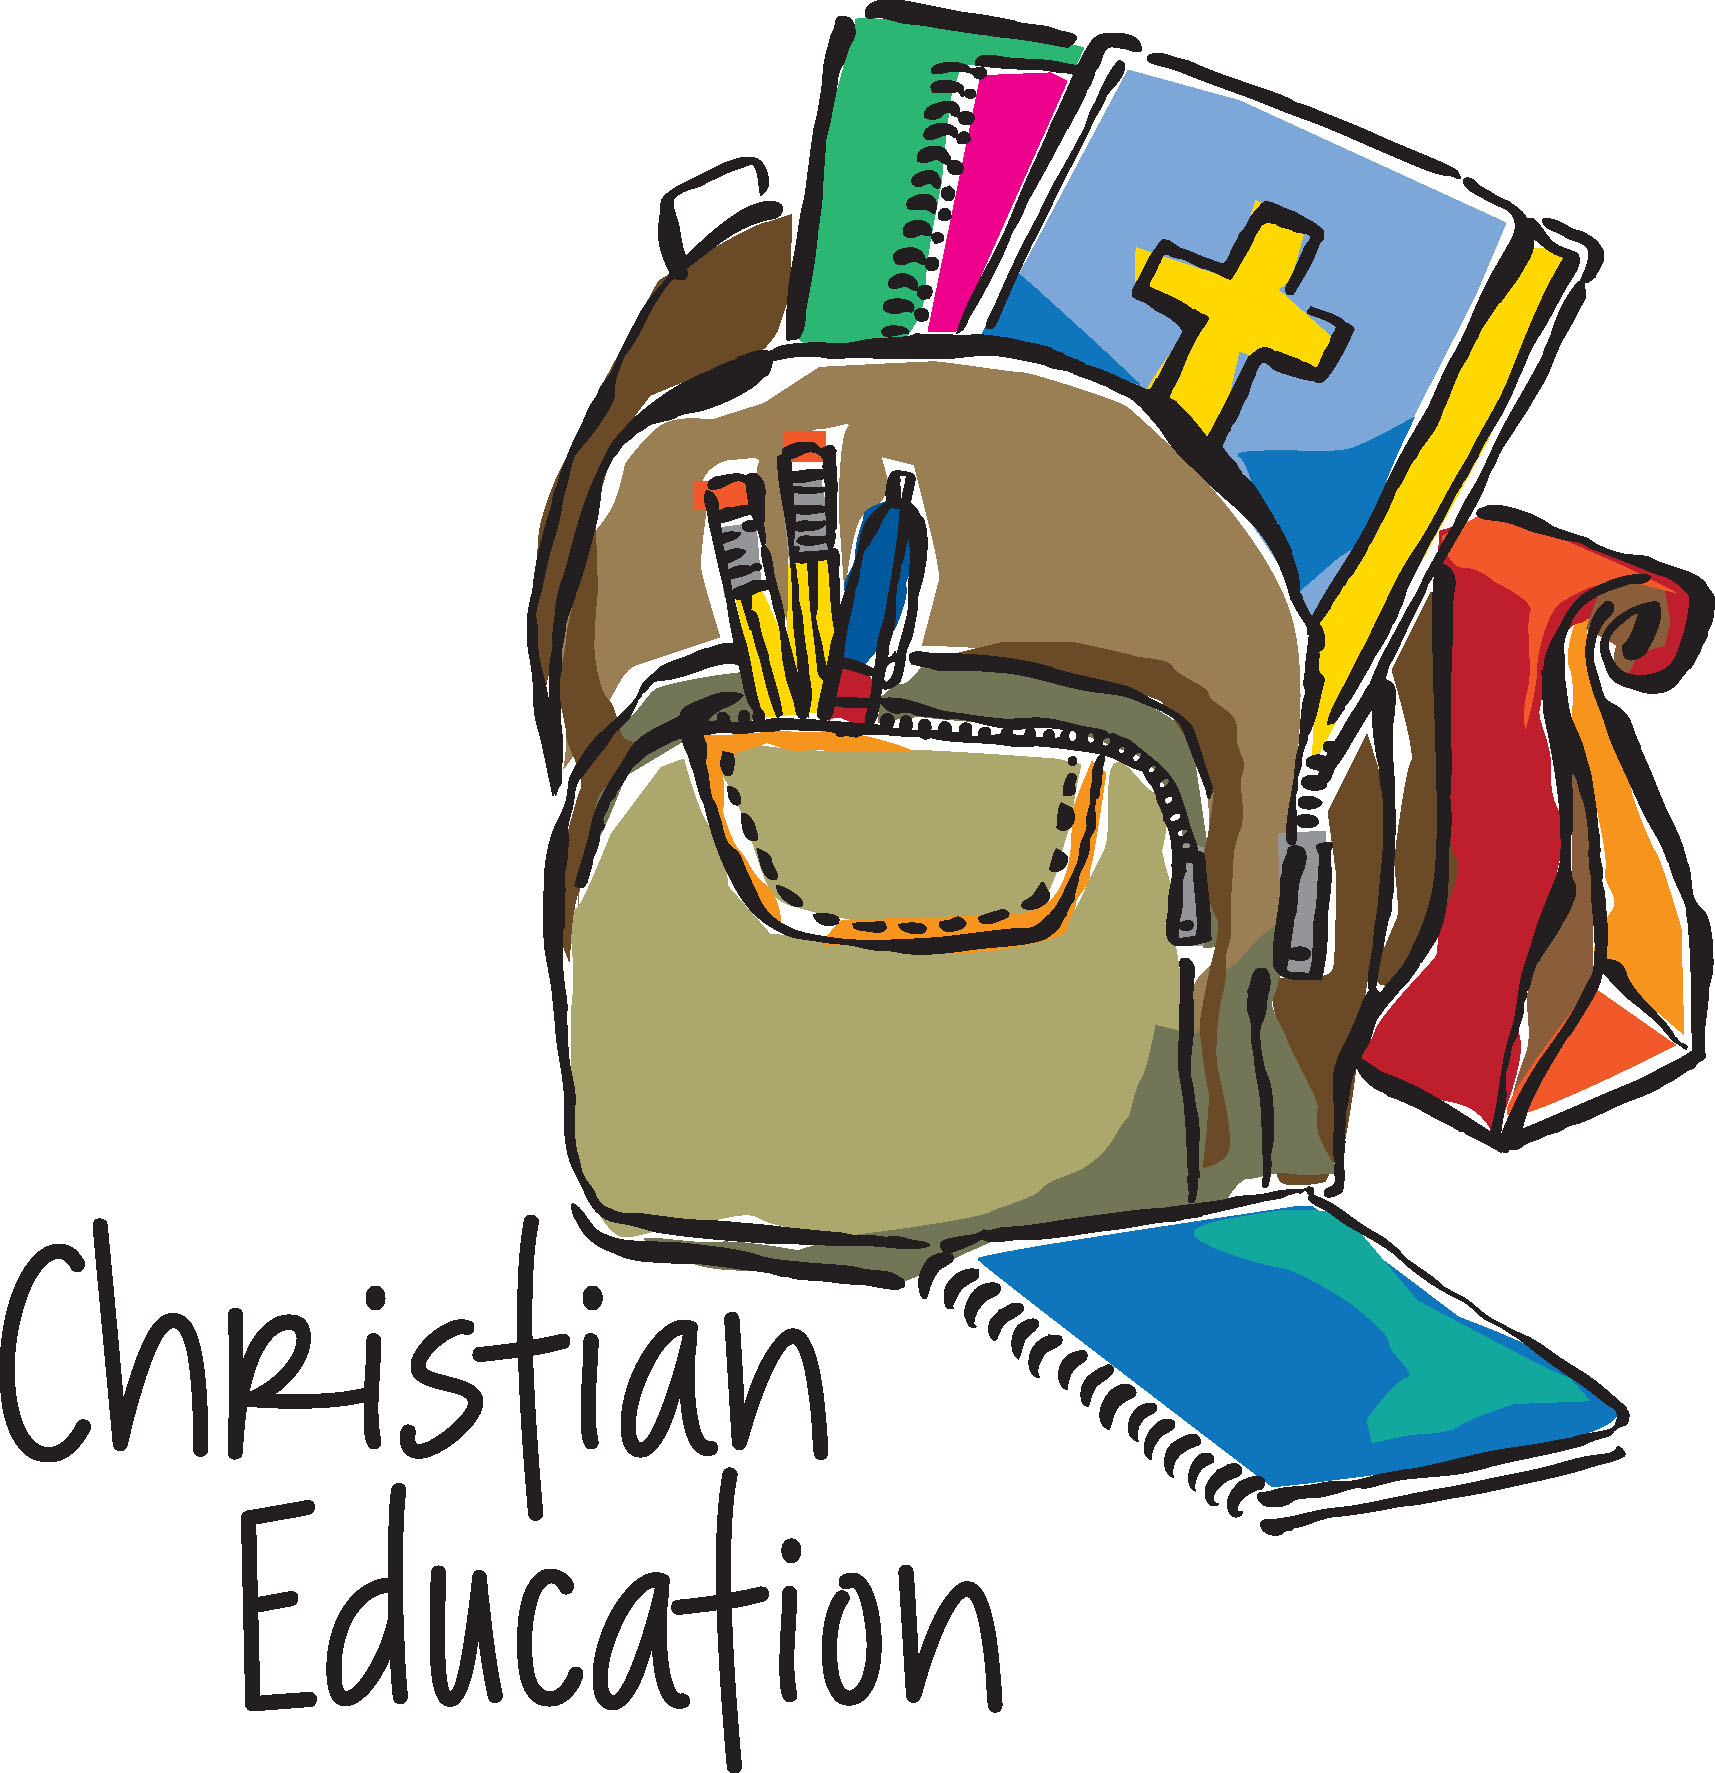 education clipart download - photo #15